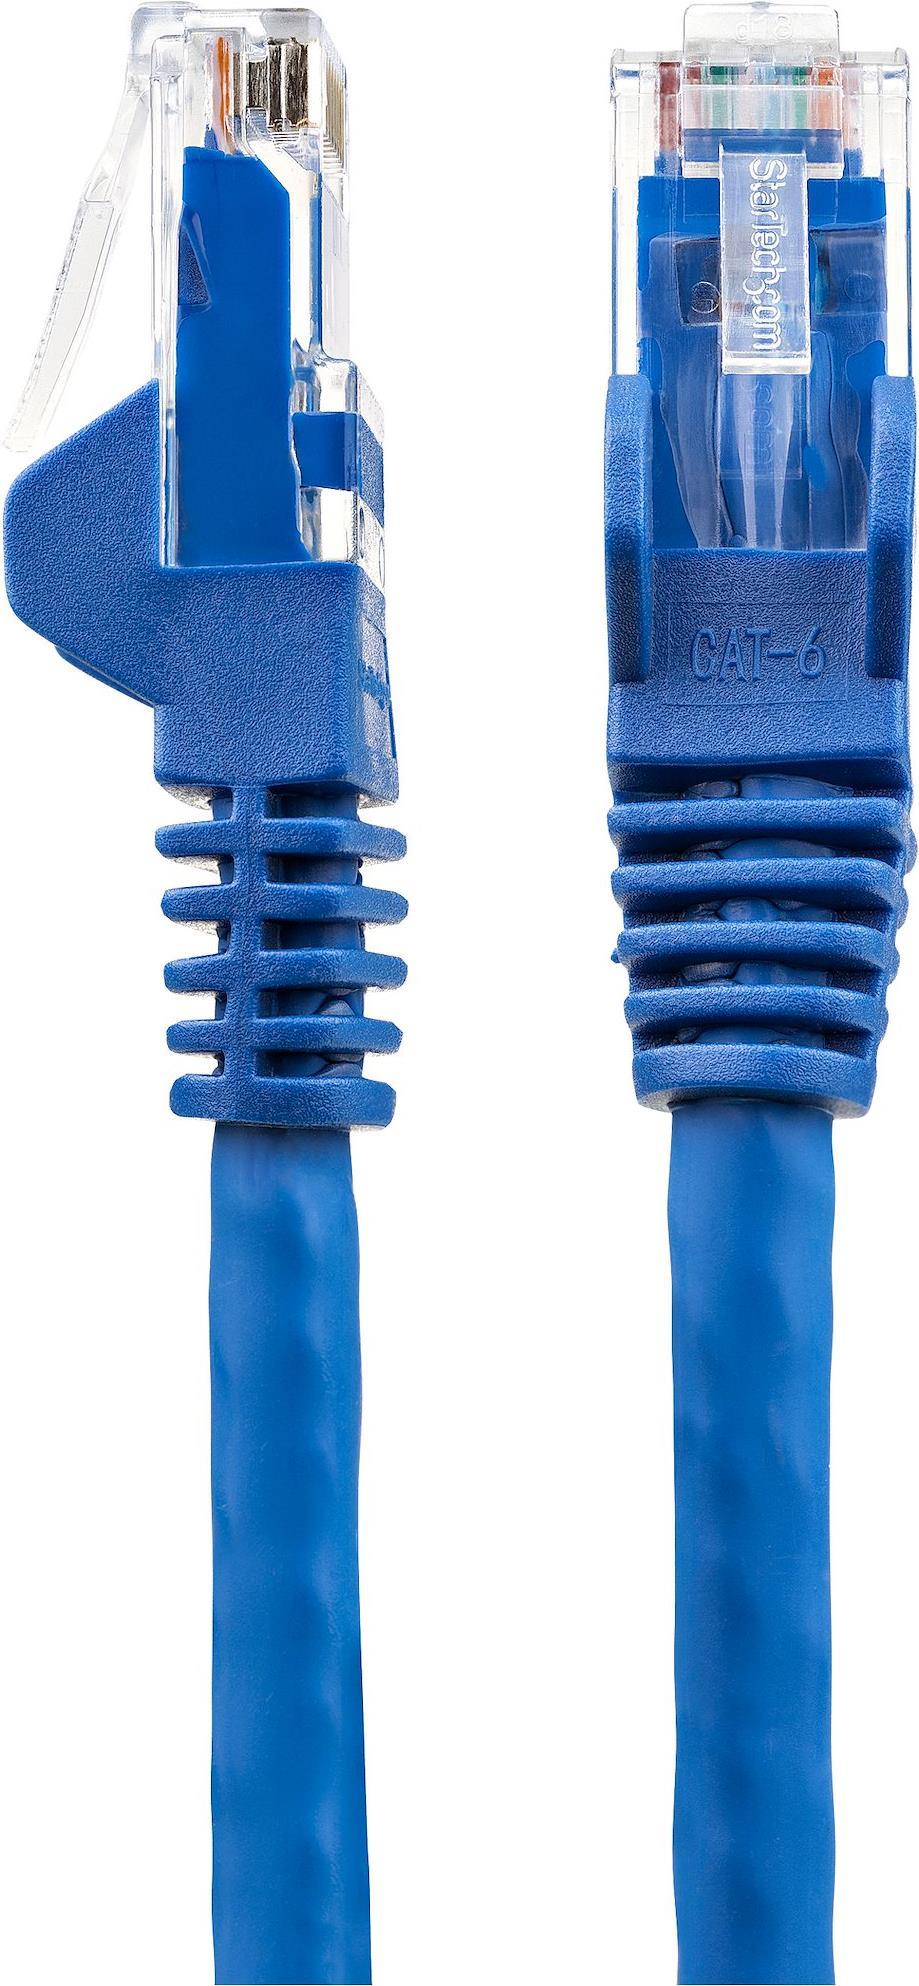 StarTech.com 10m LSZH CAT6 Ethernet Cable, 10 Gigabit Snagless RJ45 100W PoE Network Patch Cord with Strain Relief, CAT 6 10GbE UTP, Blue, Individually Tested/ETL, Low Smoke Zero Halogen (N6LPATCH10MBL)